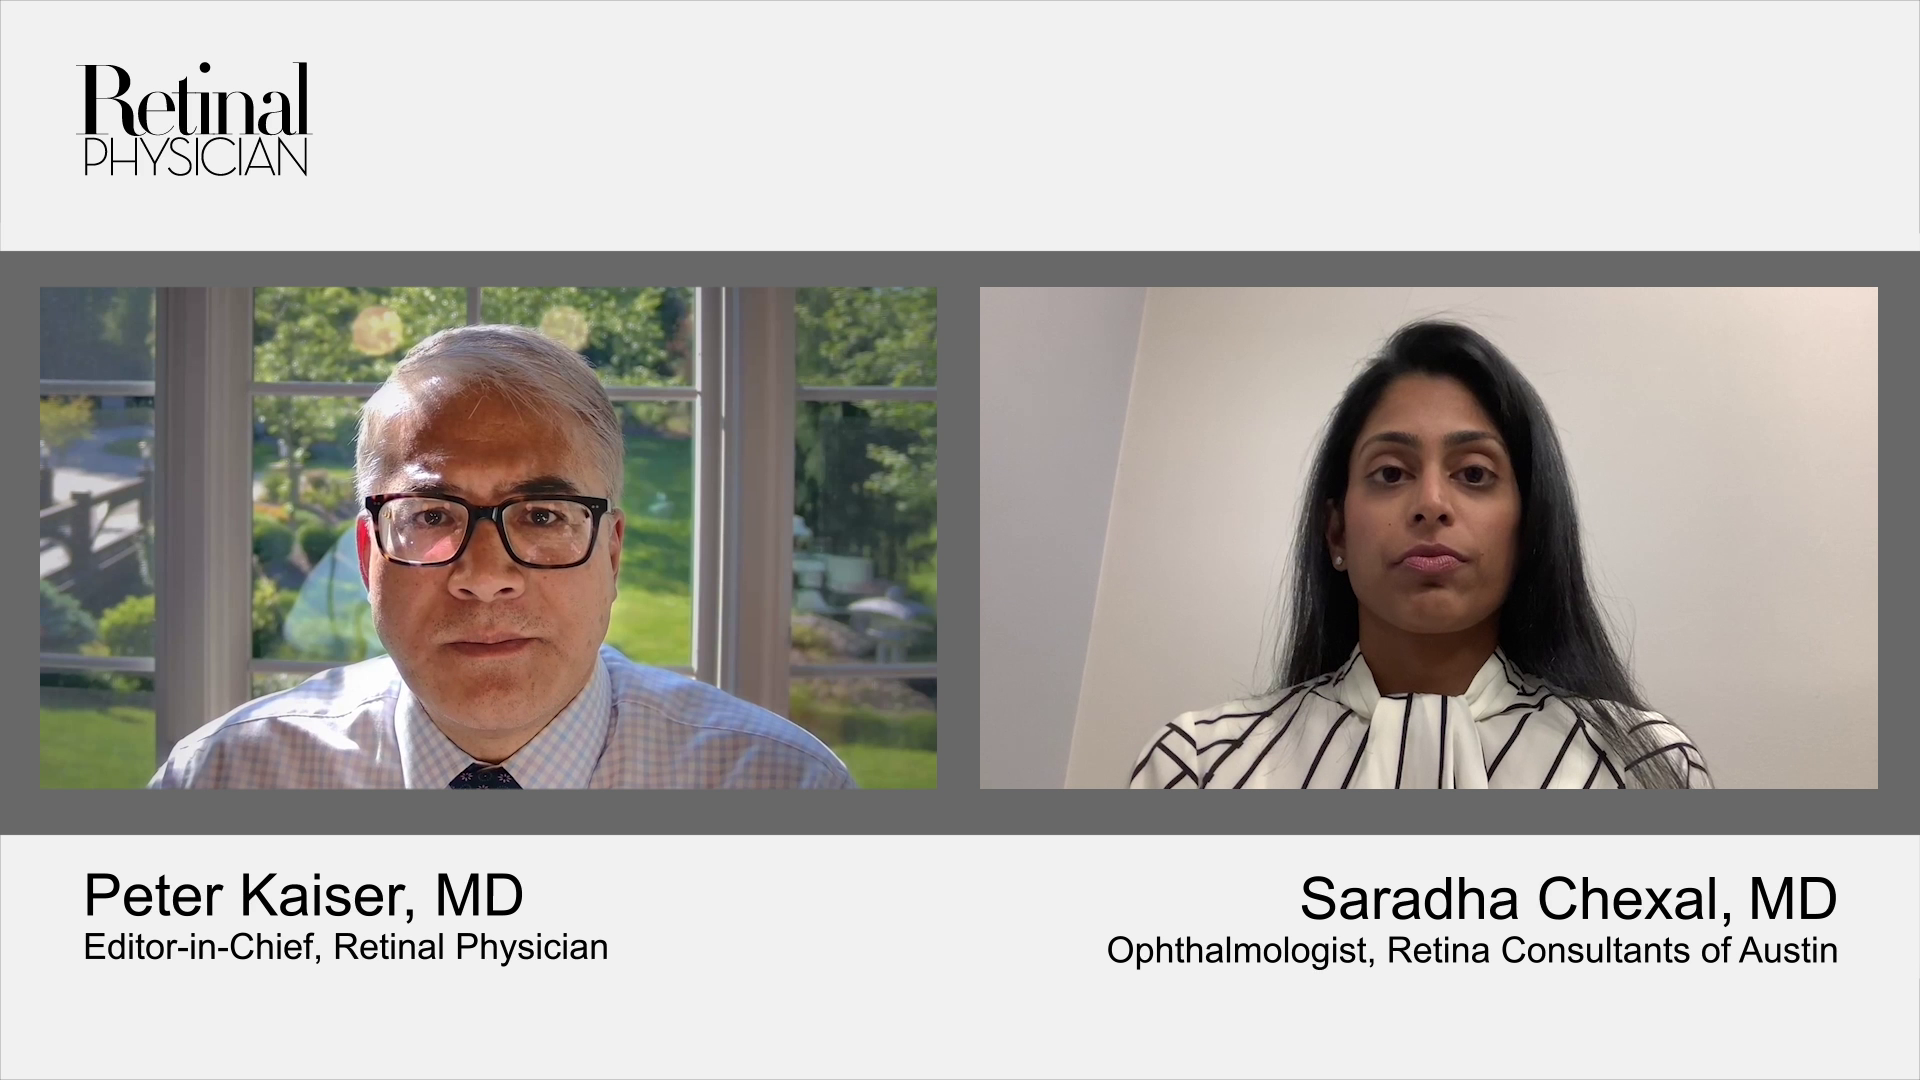 Peter Kaiser, MD and Saradha Chexal, MD discuss patient selection for geographic atrophy treatments.